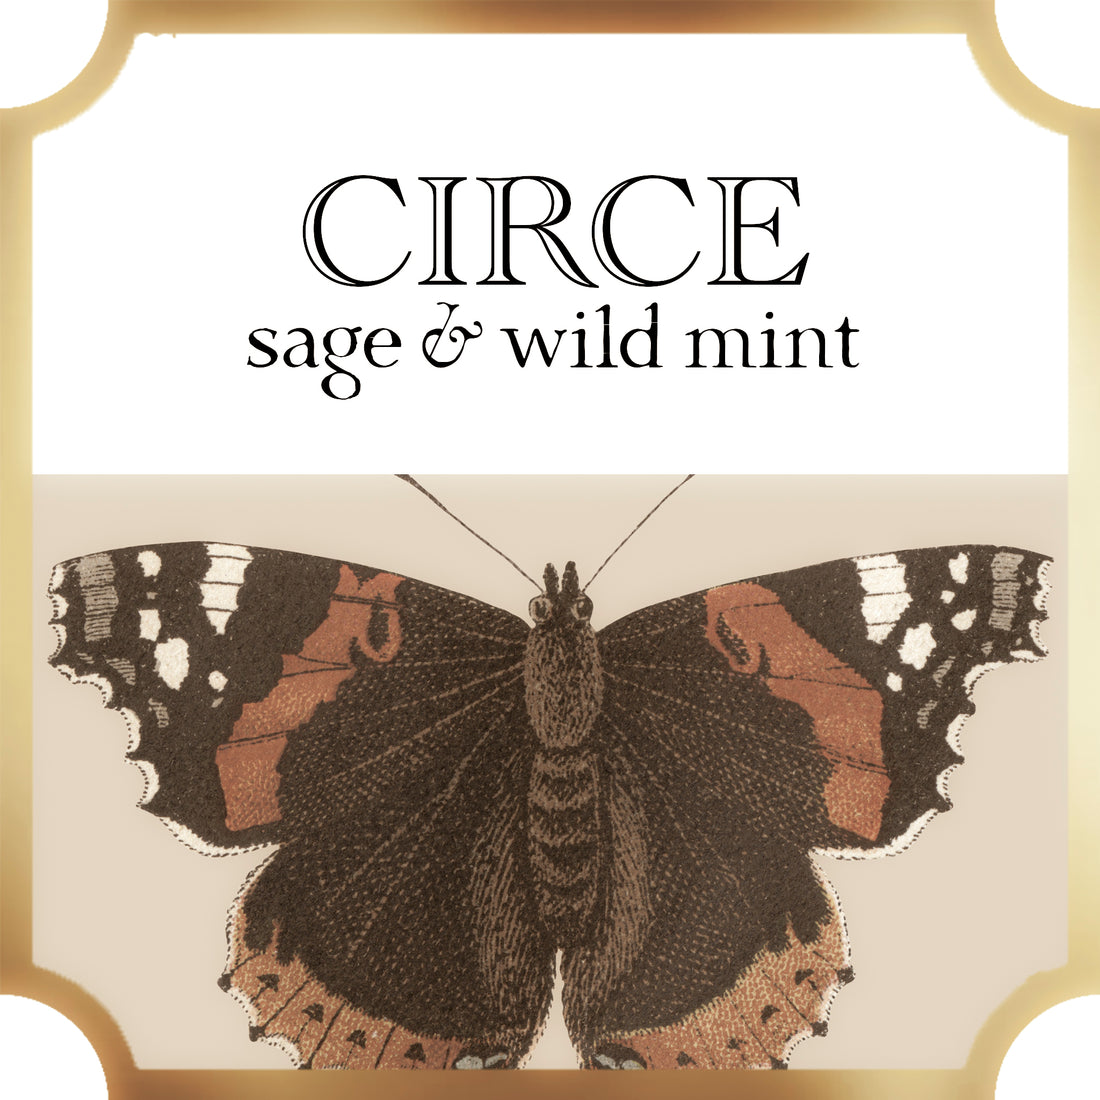  circe home fragrance a pleasant thought